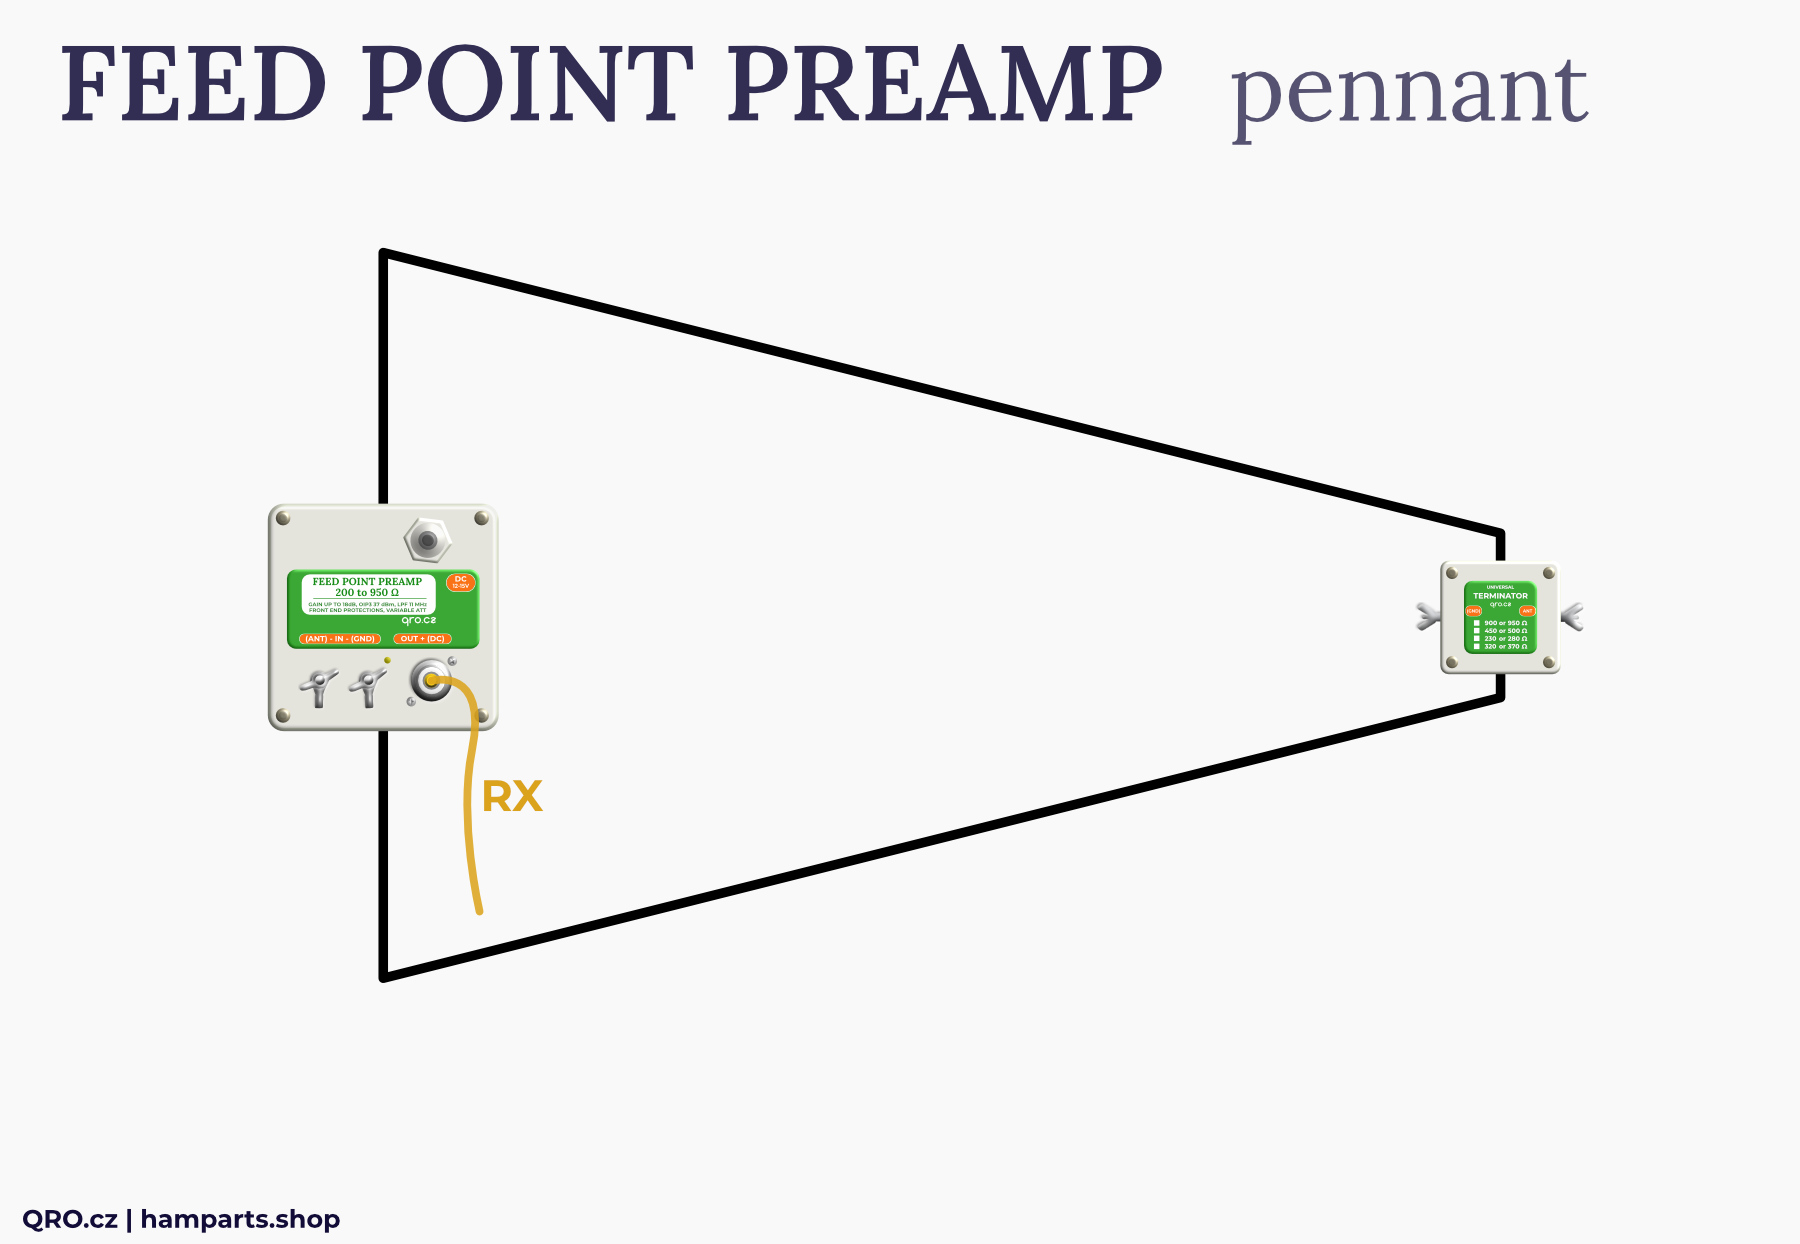 feed point preamp box with universal terminator pennant rx antenna by qro.cz hamparts.shop